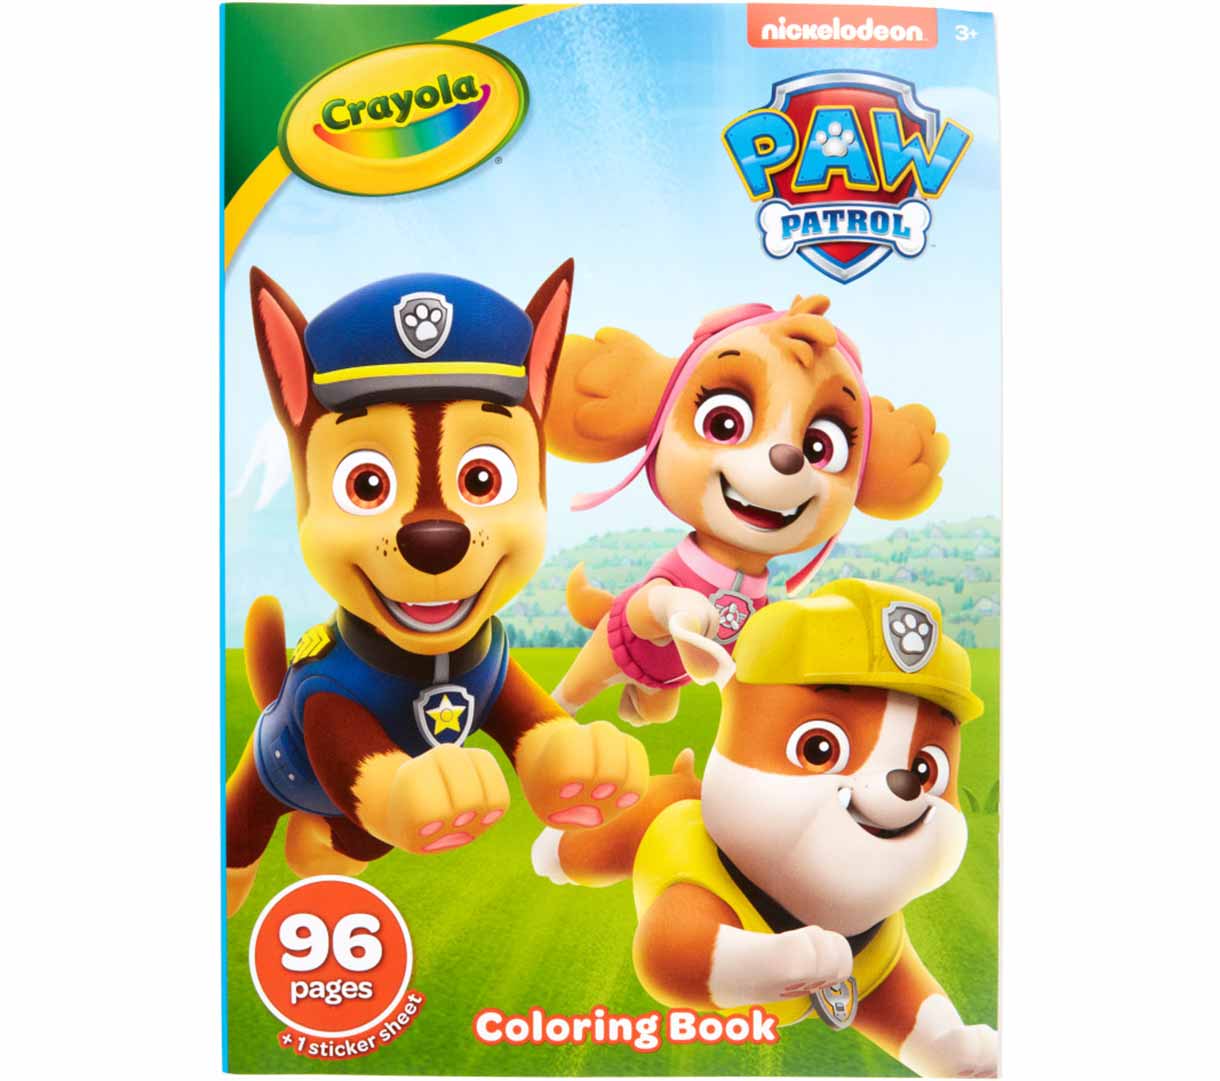 Paw patrol coloring book with stickers pgs